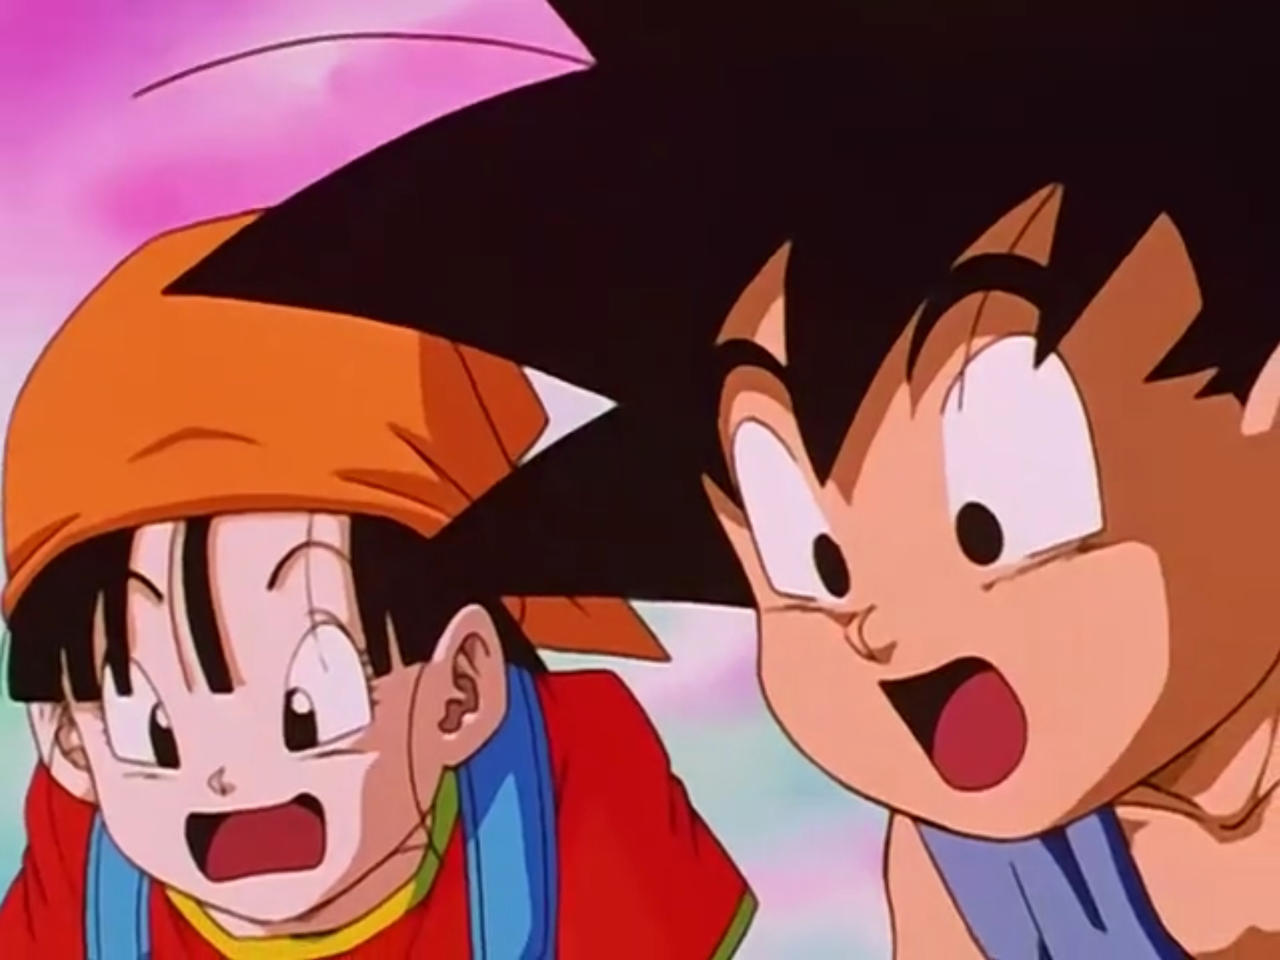 #“Dragon Ball Magic”: “Leaks” fuel rumors about a new anime series